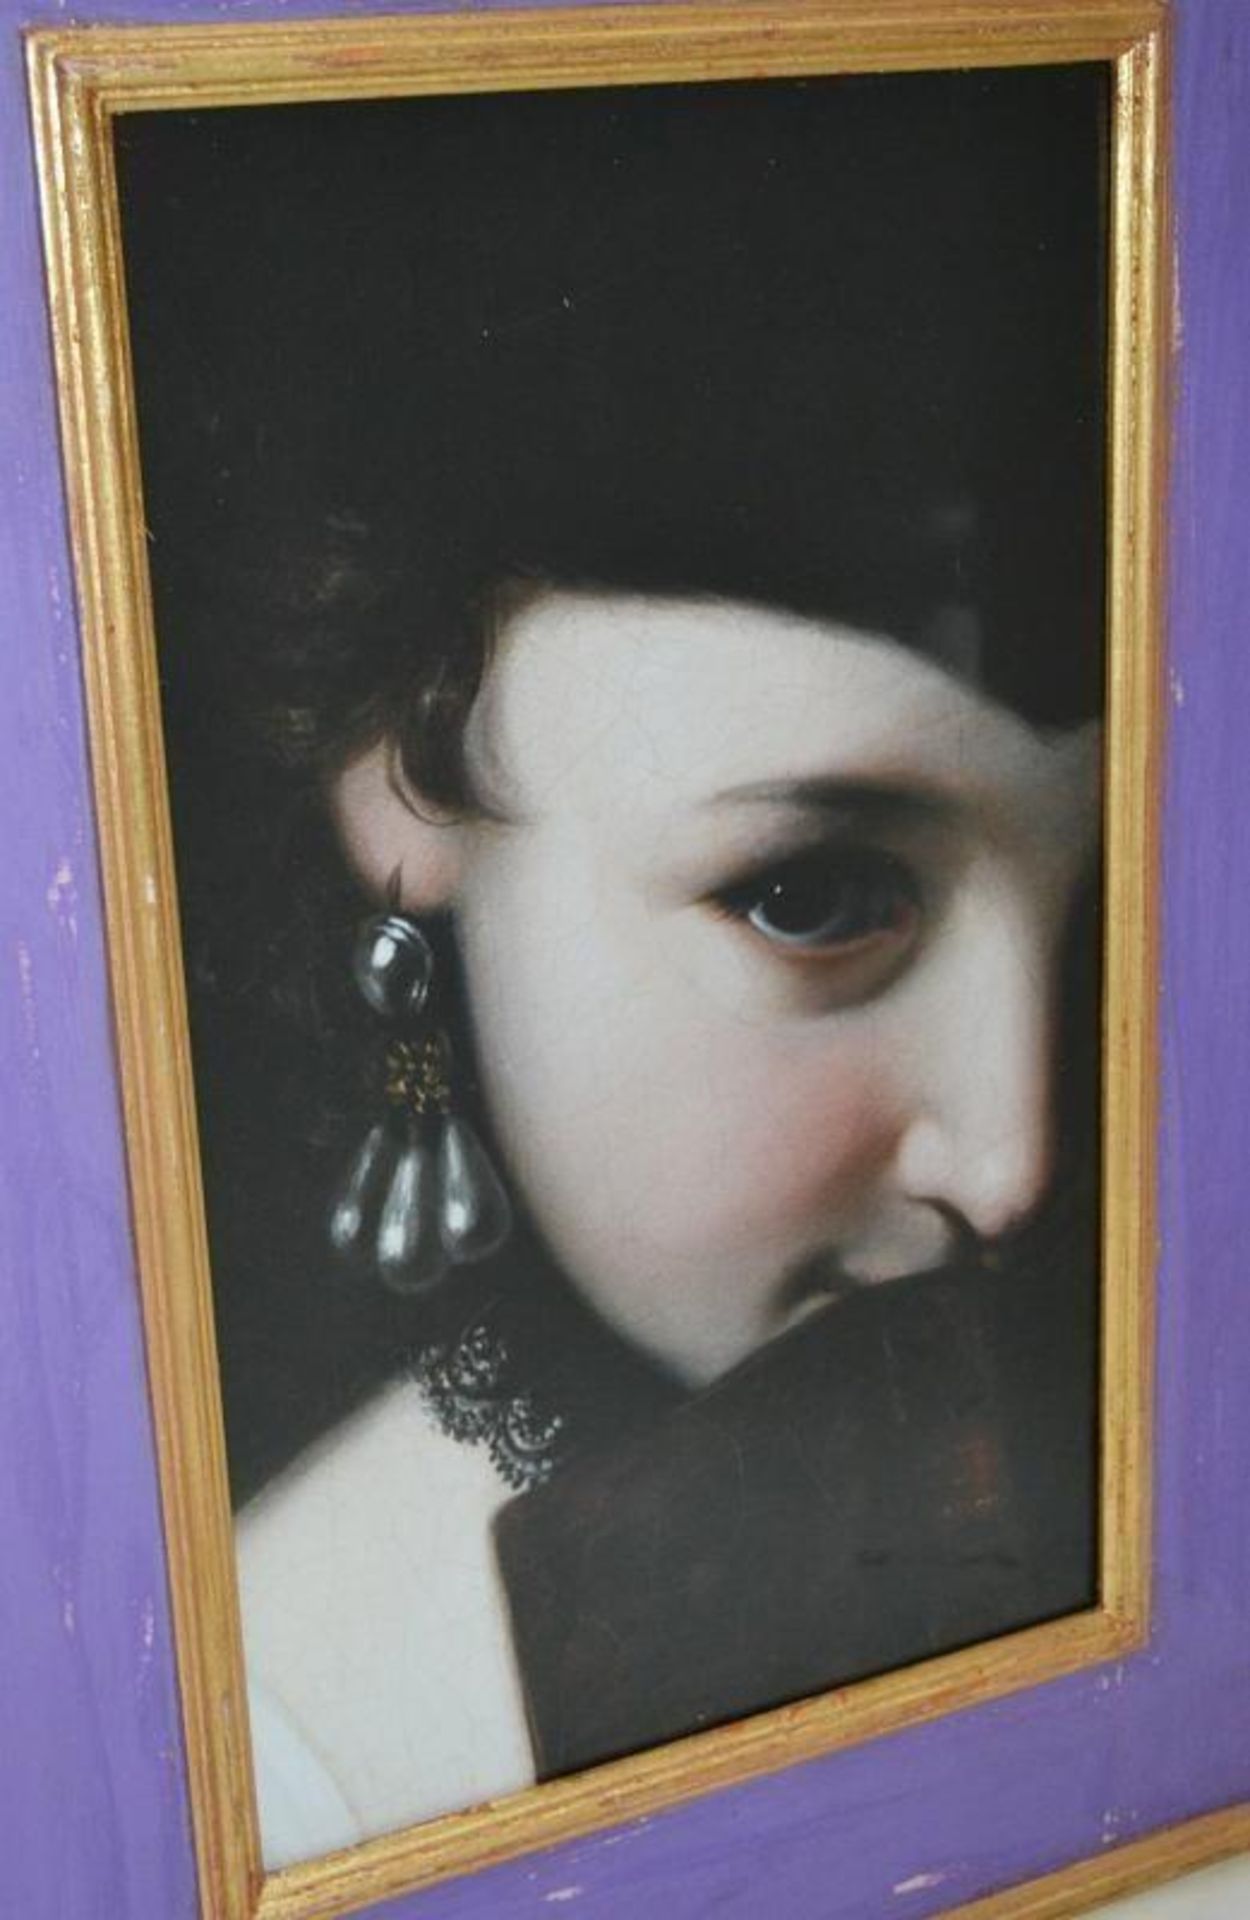 1 x Moissonnier Frères From France -&nbsp; Framed Picture Of Lady&nbsp;- Dimensions Length H72 x 53 - Image 6 of 6